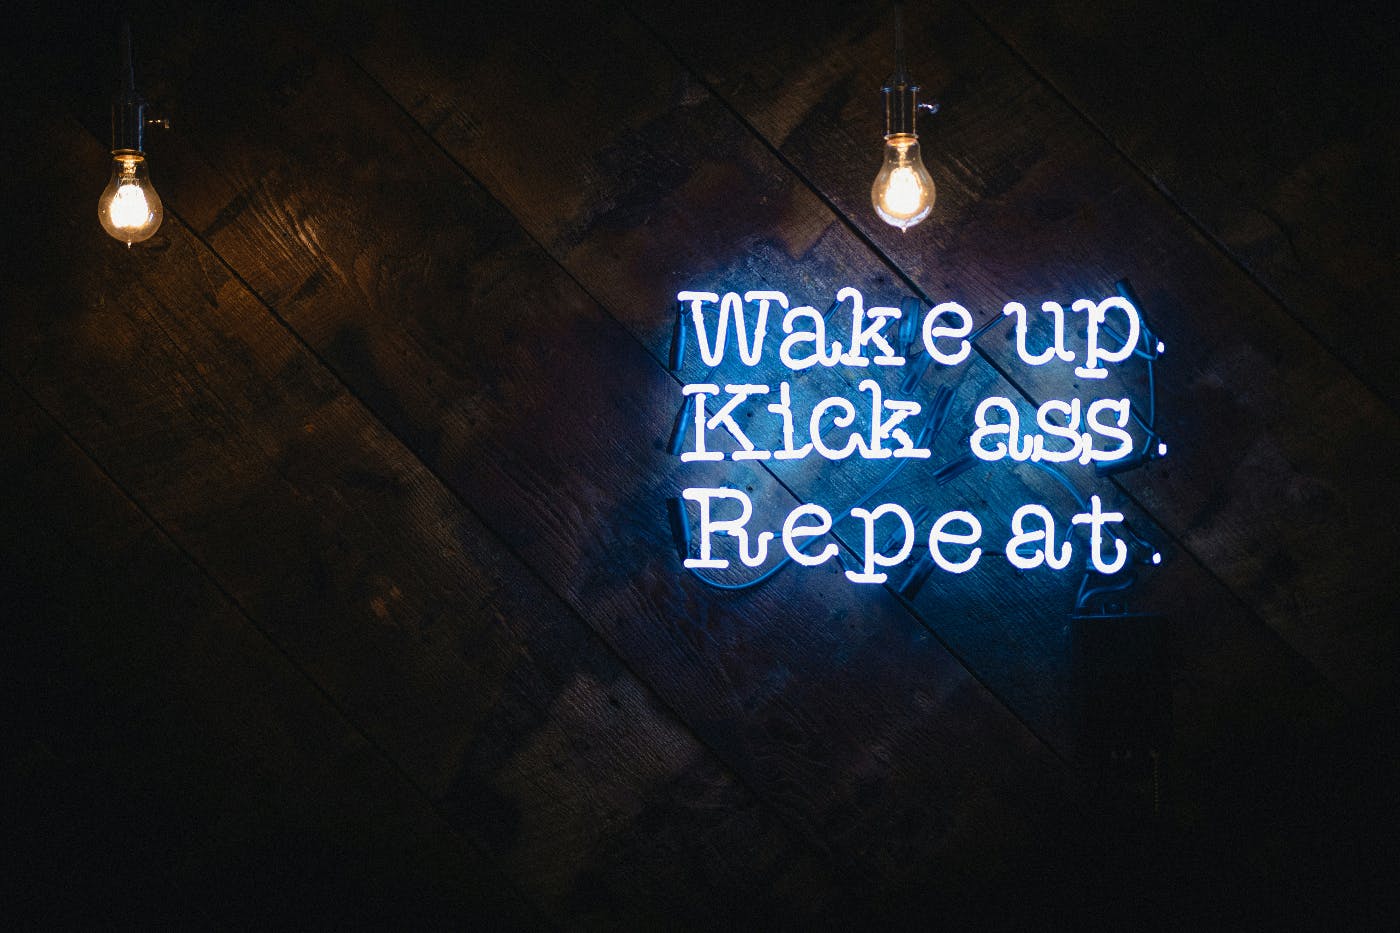 A blue neon sign on a wood wall reading Wake up. Kick ass. Repeat.